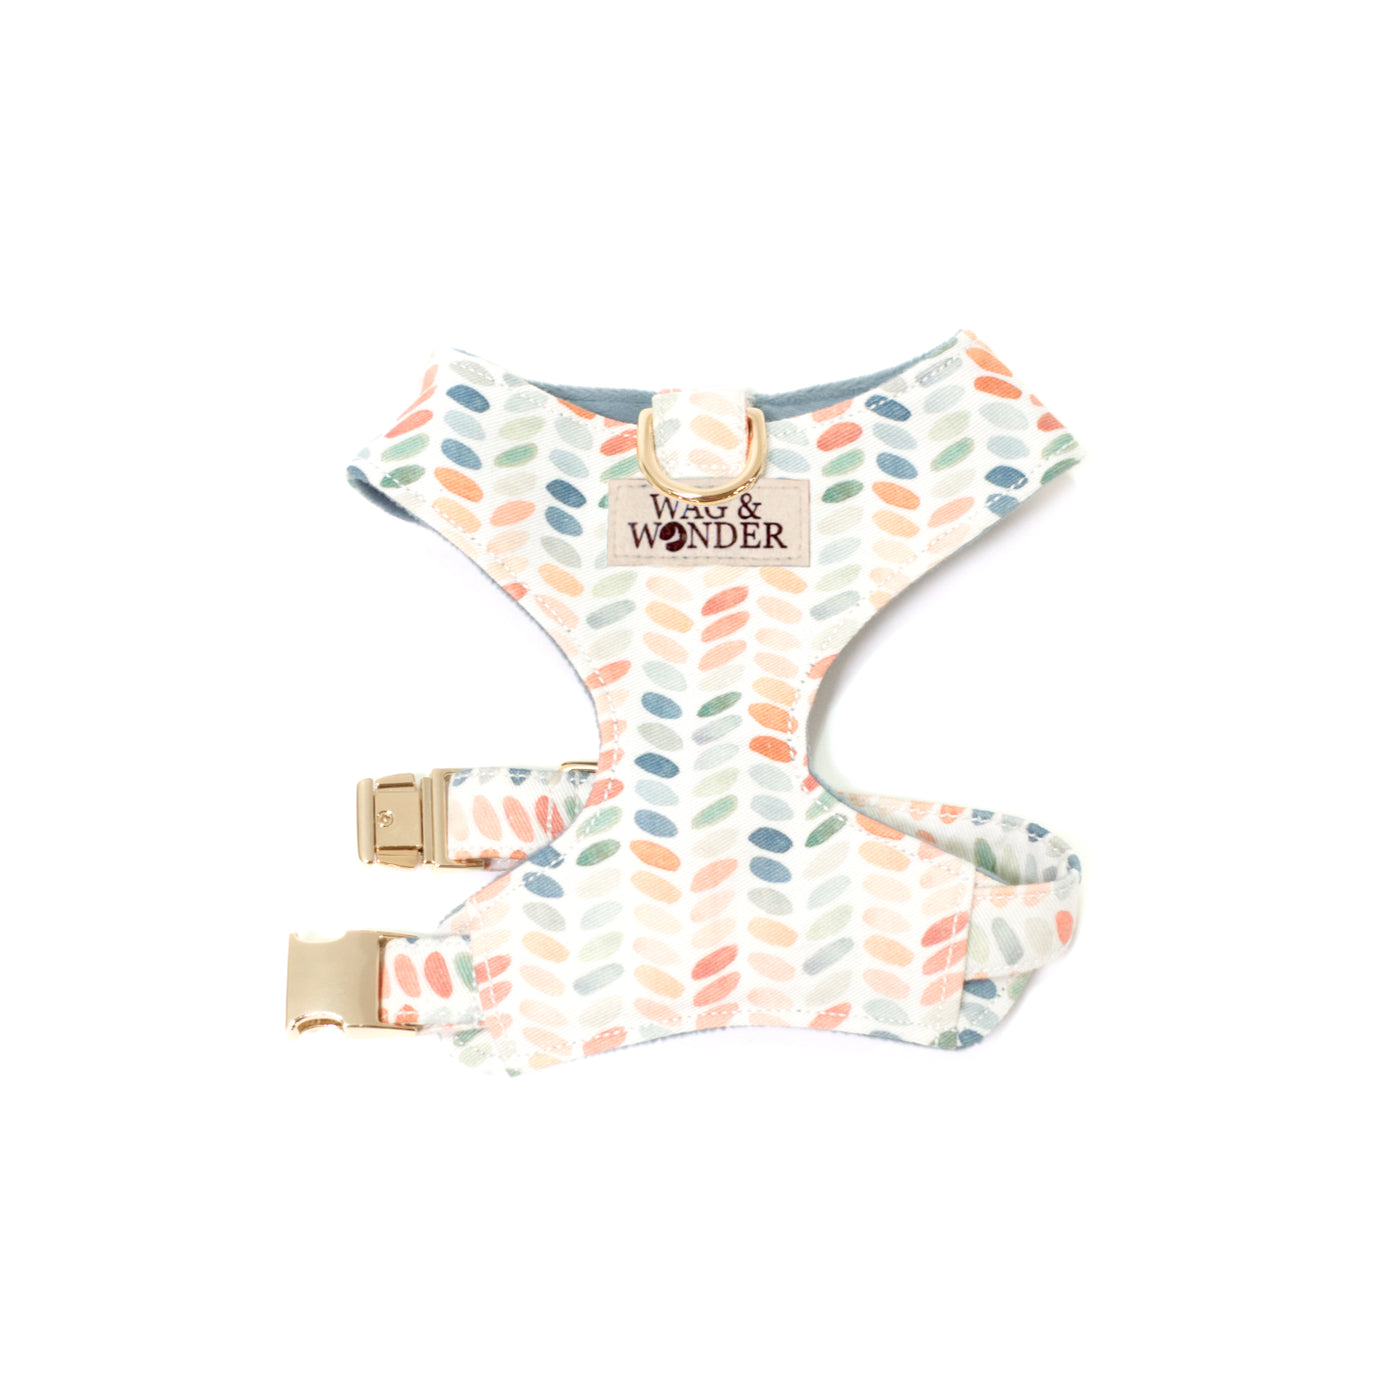 Reversible dog harenss in modern polka dot print shown in size XS with one buckle at chest.